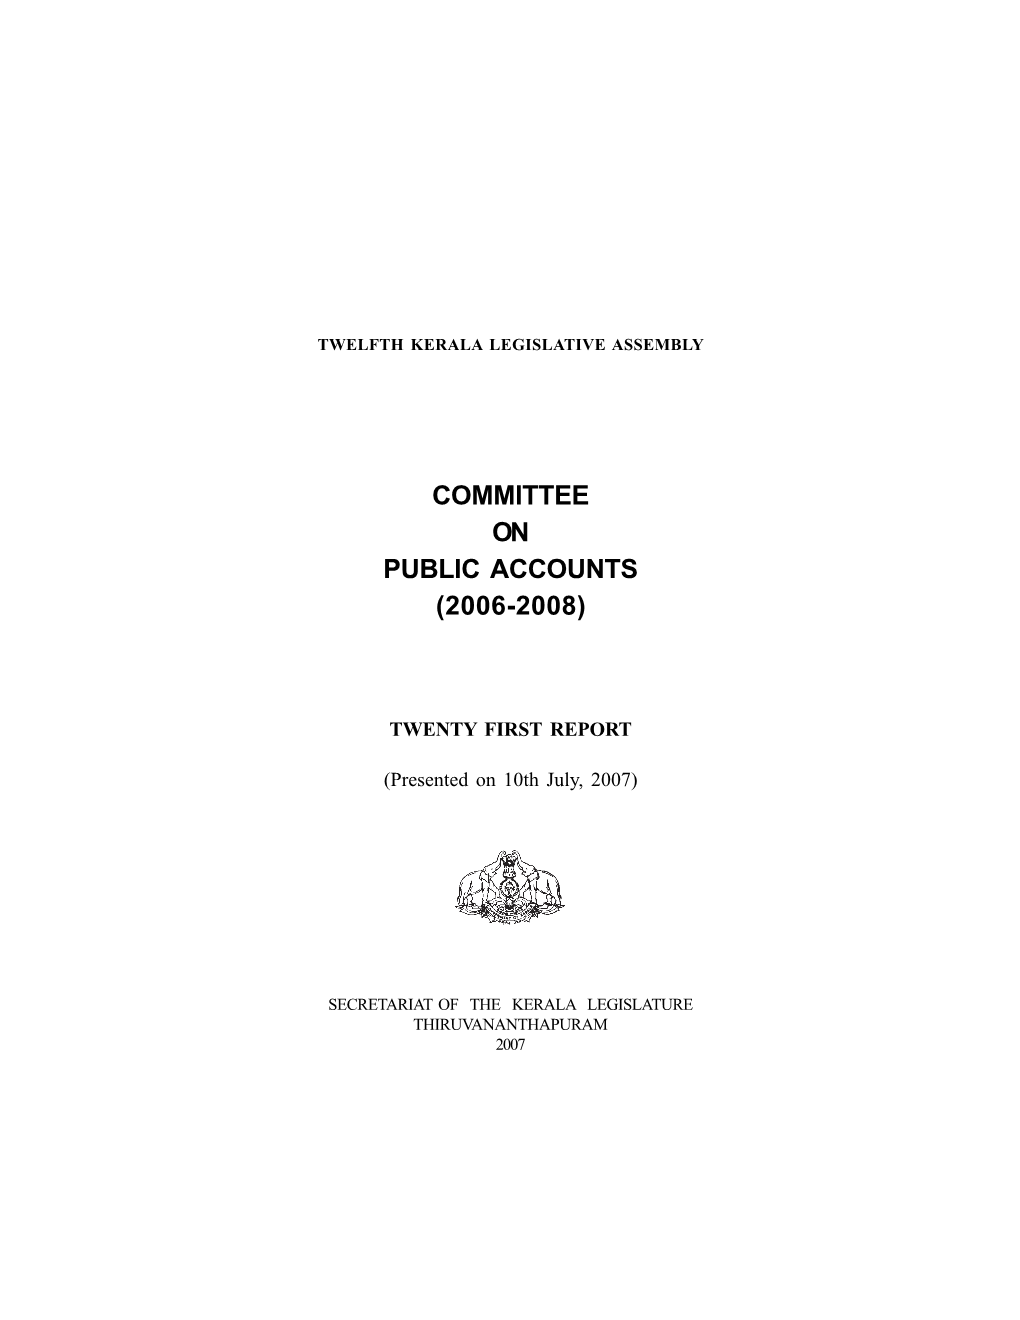 Committee on Public Accounts (2006-2008)